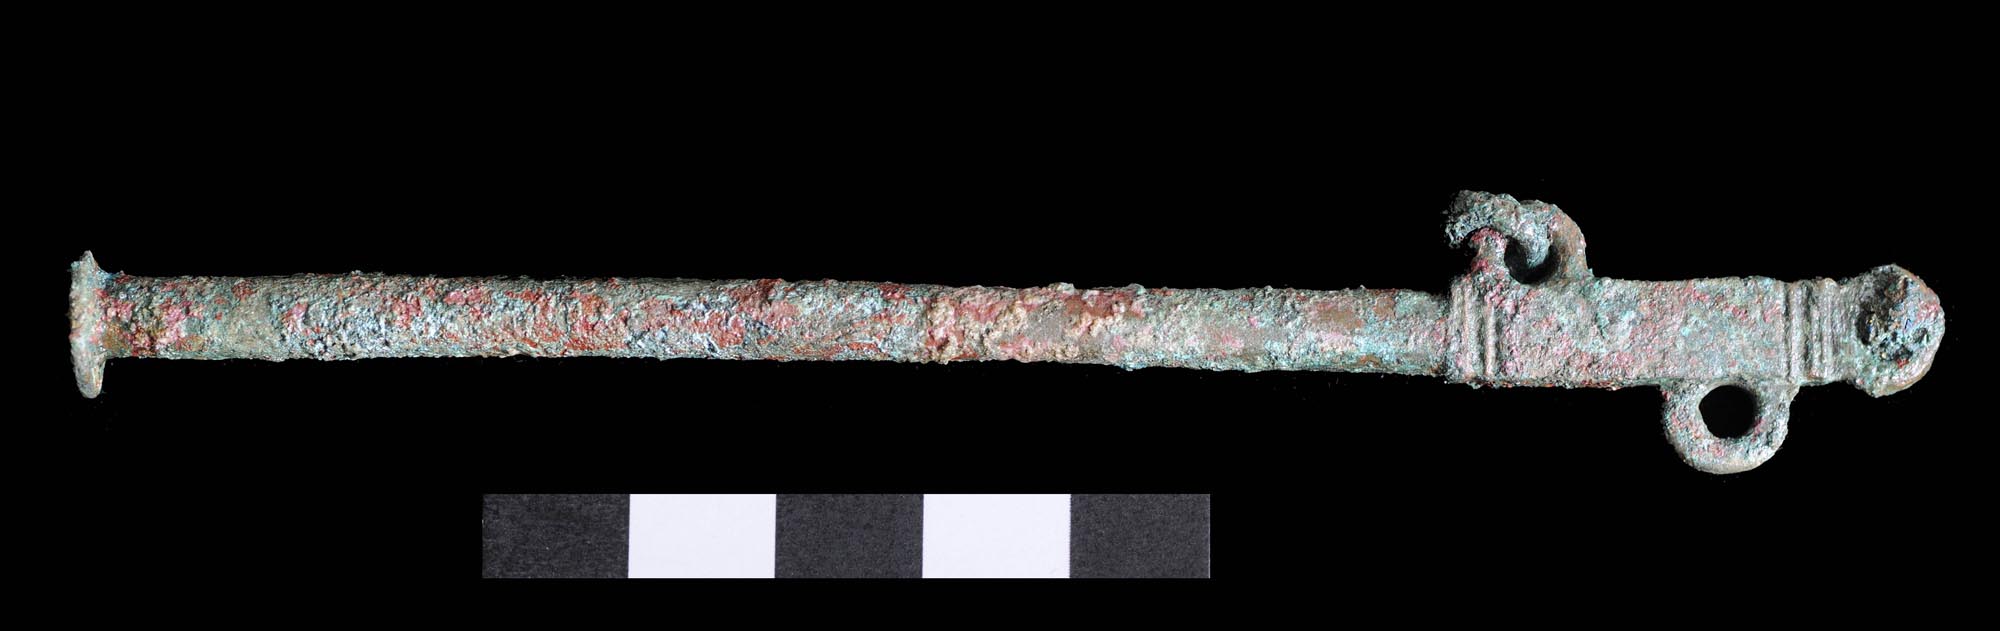 A Roman steelyard found at Vine Street. A steelyard was a type of balance used to weigh small item of merchandise - University of Leicester Archaeological Services